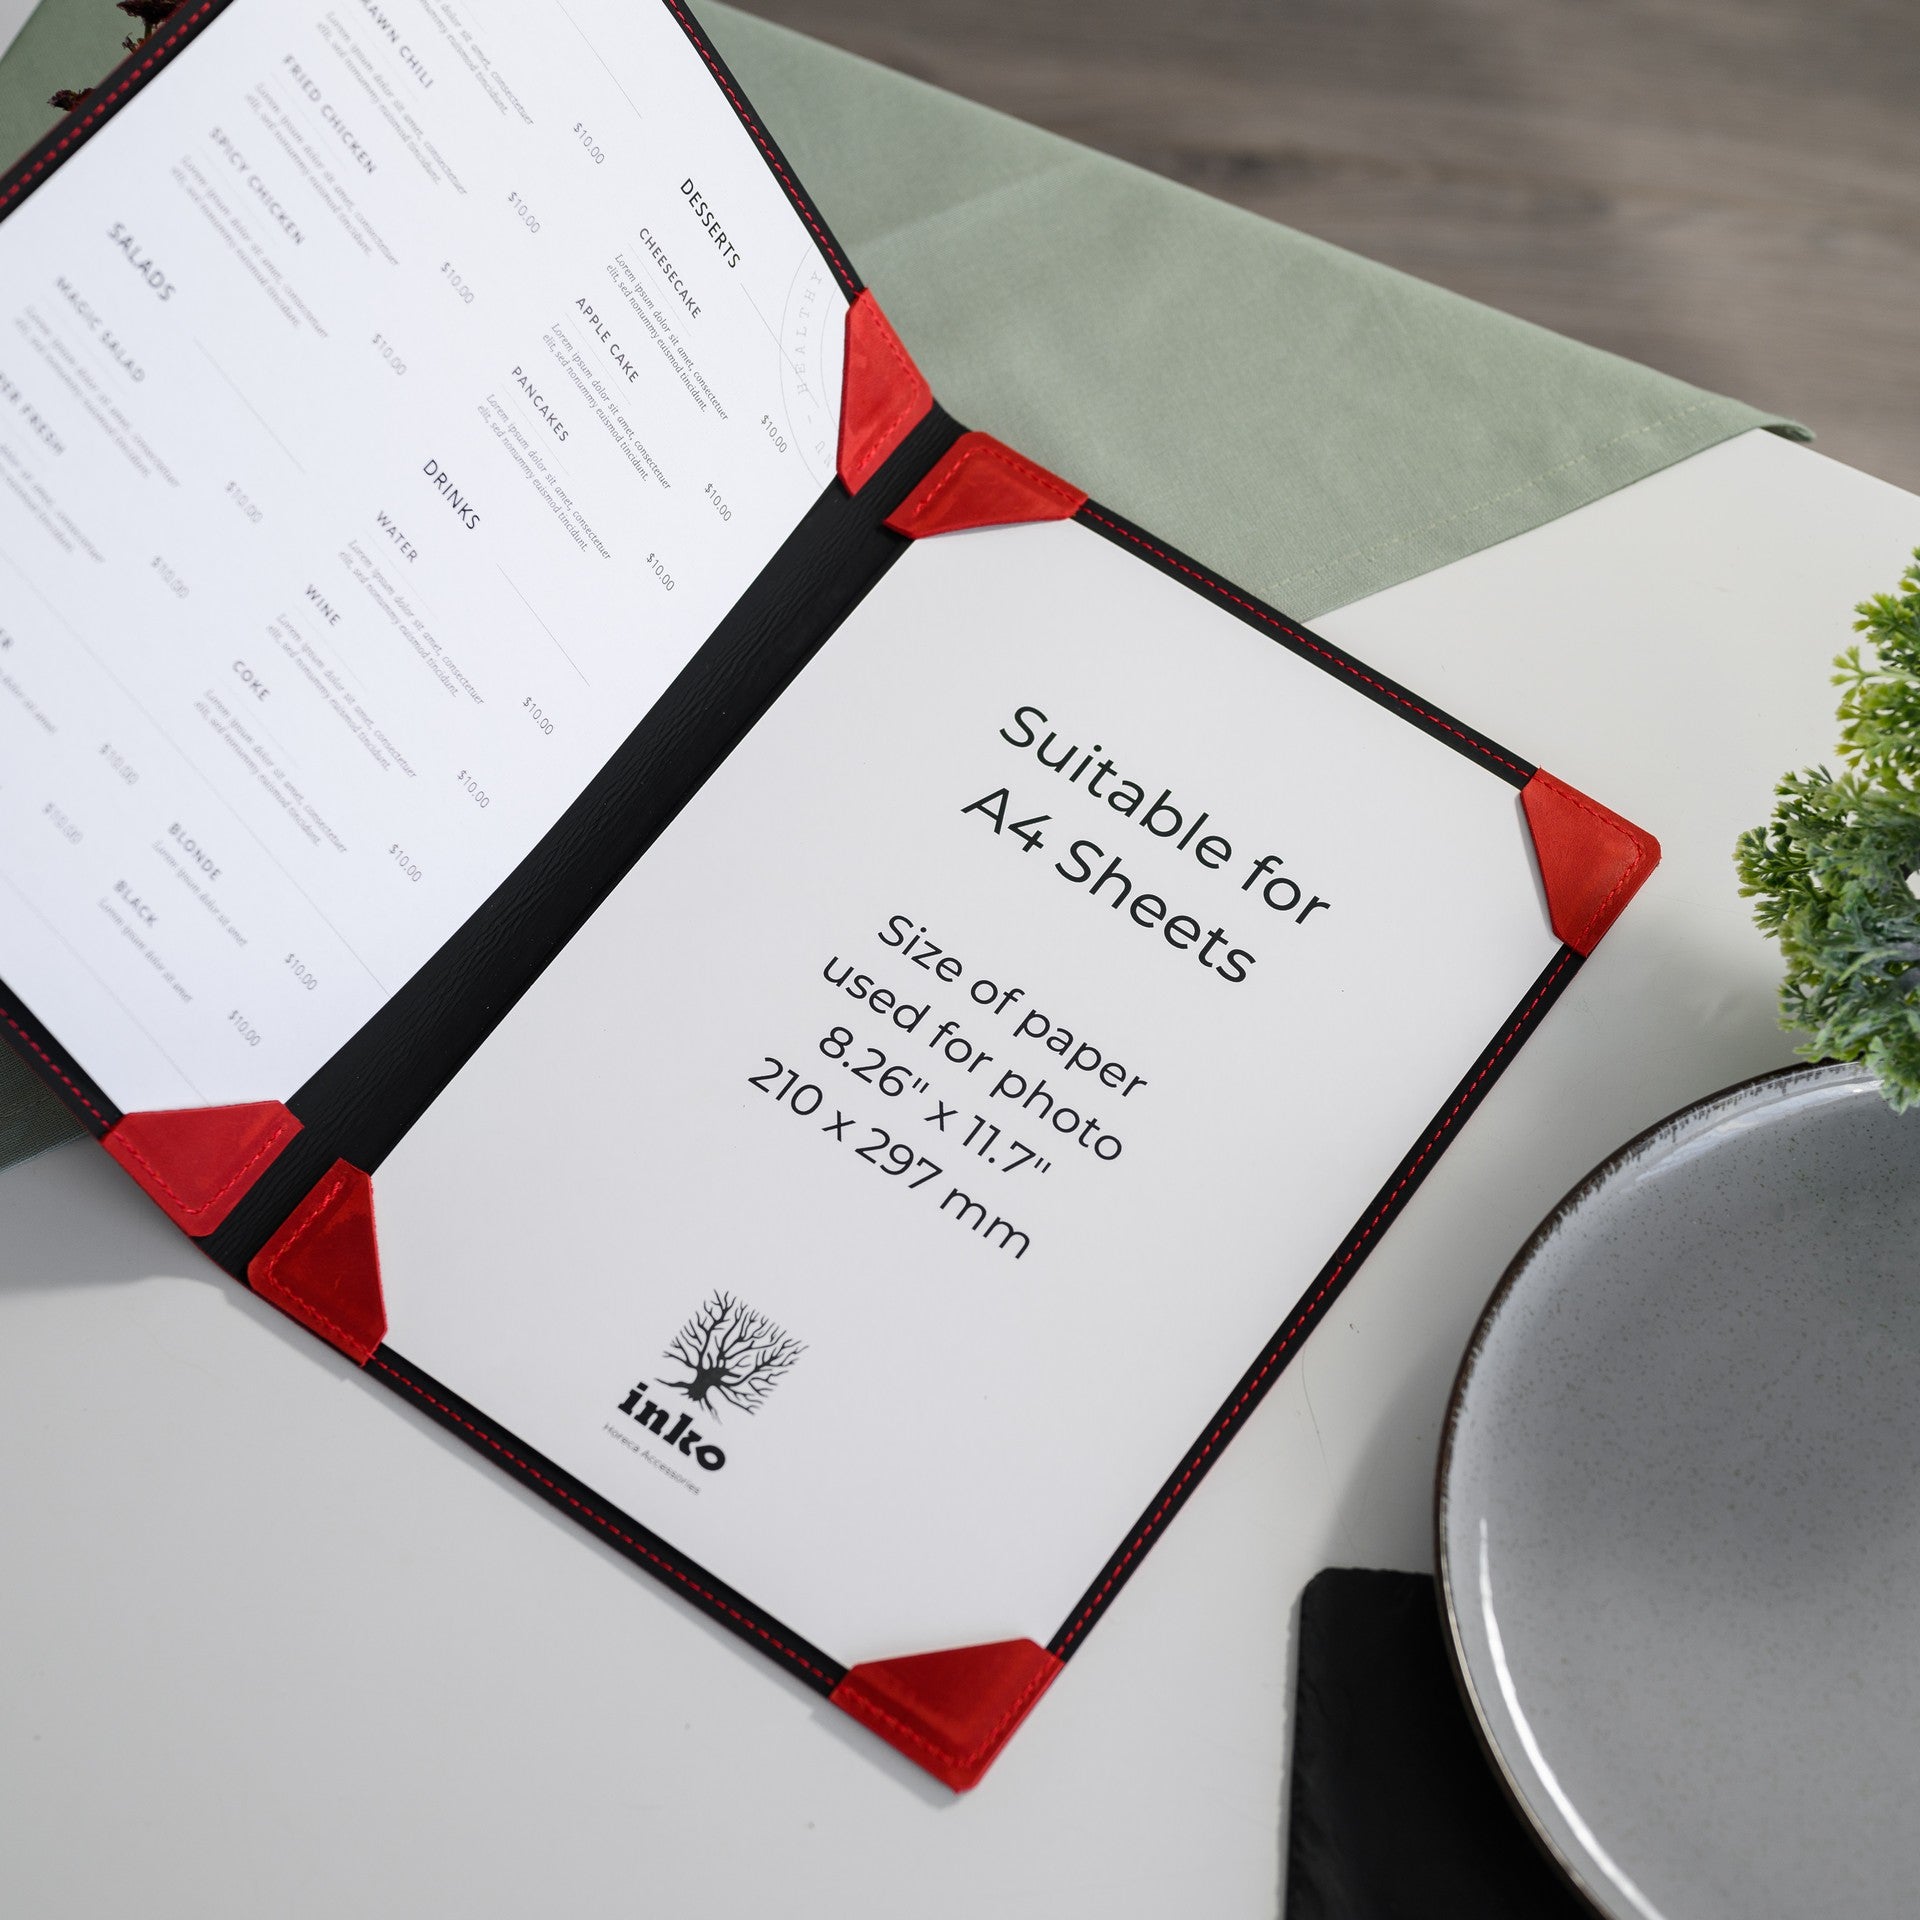 Menu Cover with Corner Mountings, ensuring both security and aesthetics, providing a sleek and functional solution for displaying your menu offerings with style and precision.